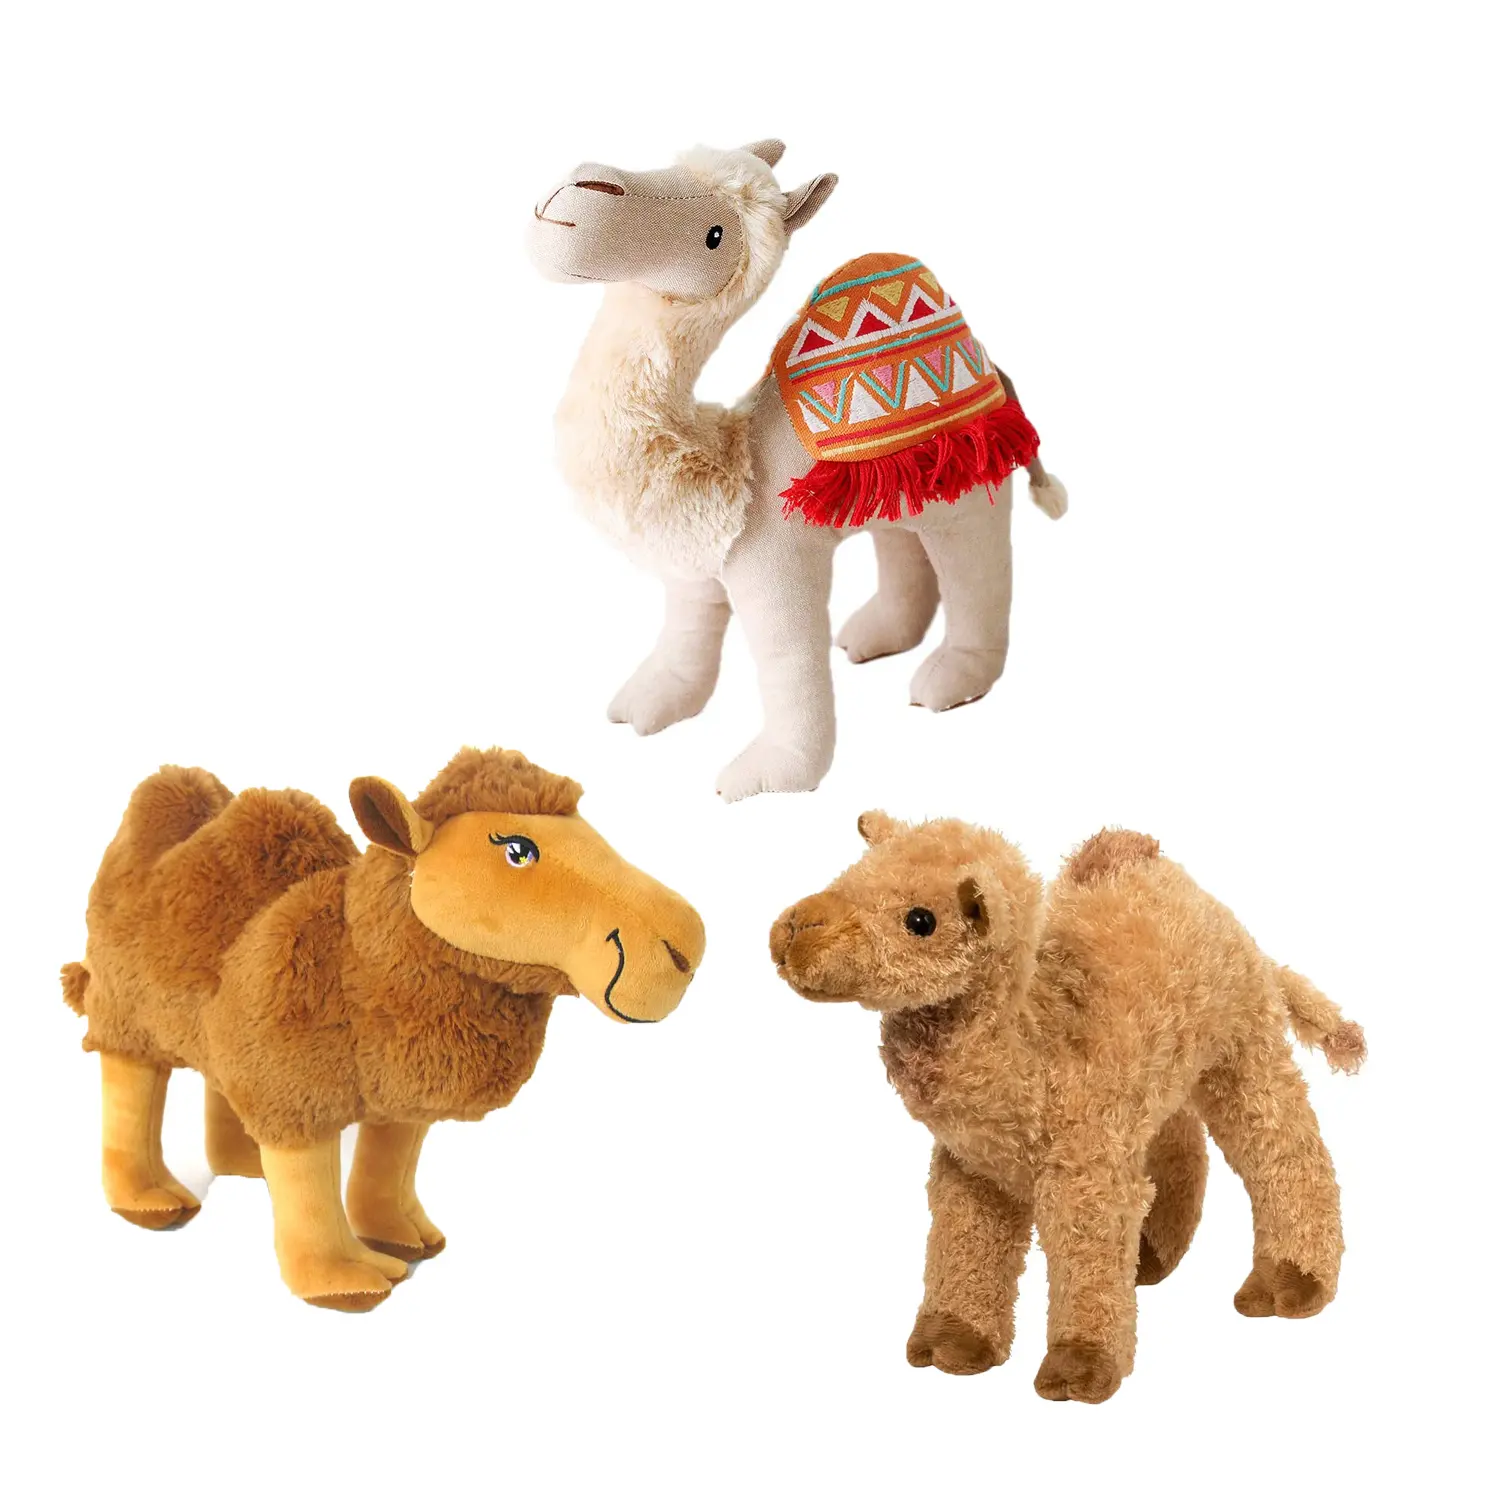 High Quality Wildlife Stuffed Animal Camel Plush Toys Zoo Party Prop Best Birthday Gift Idea For Children